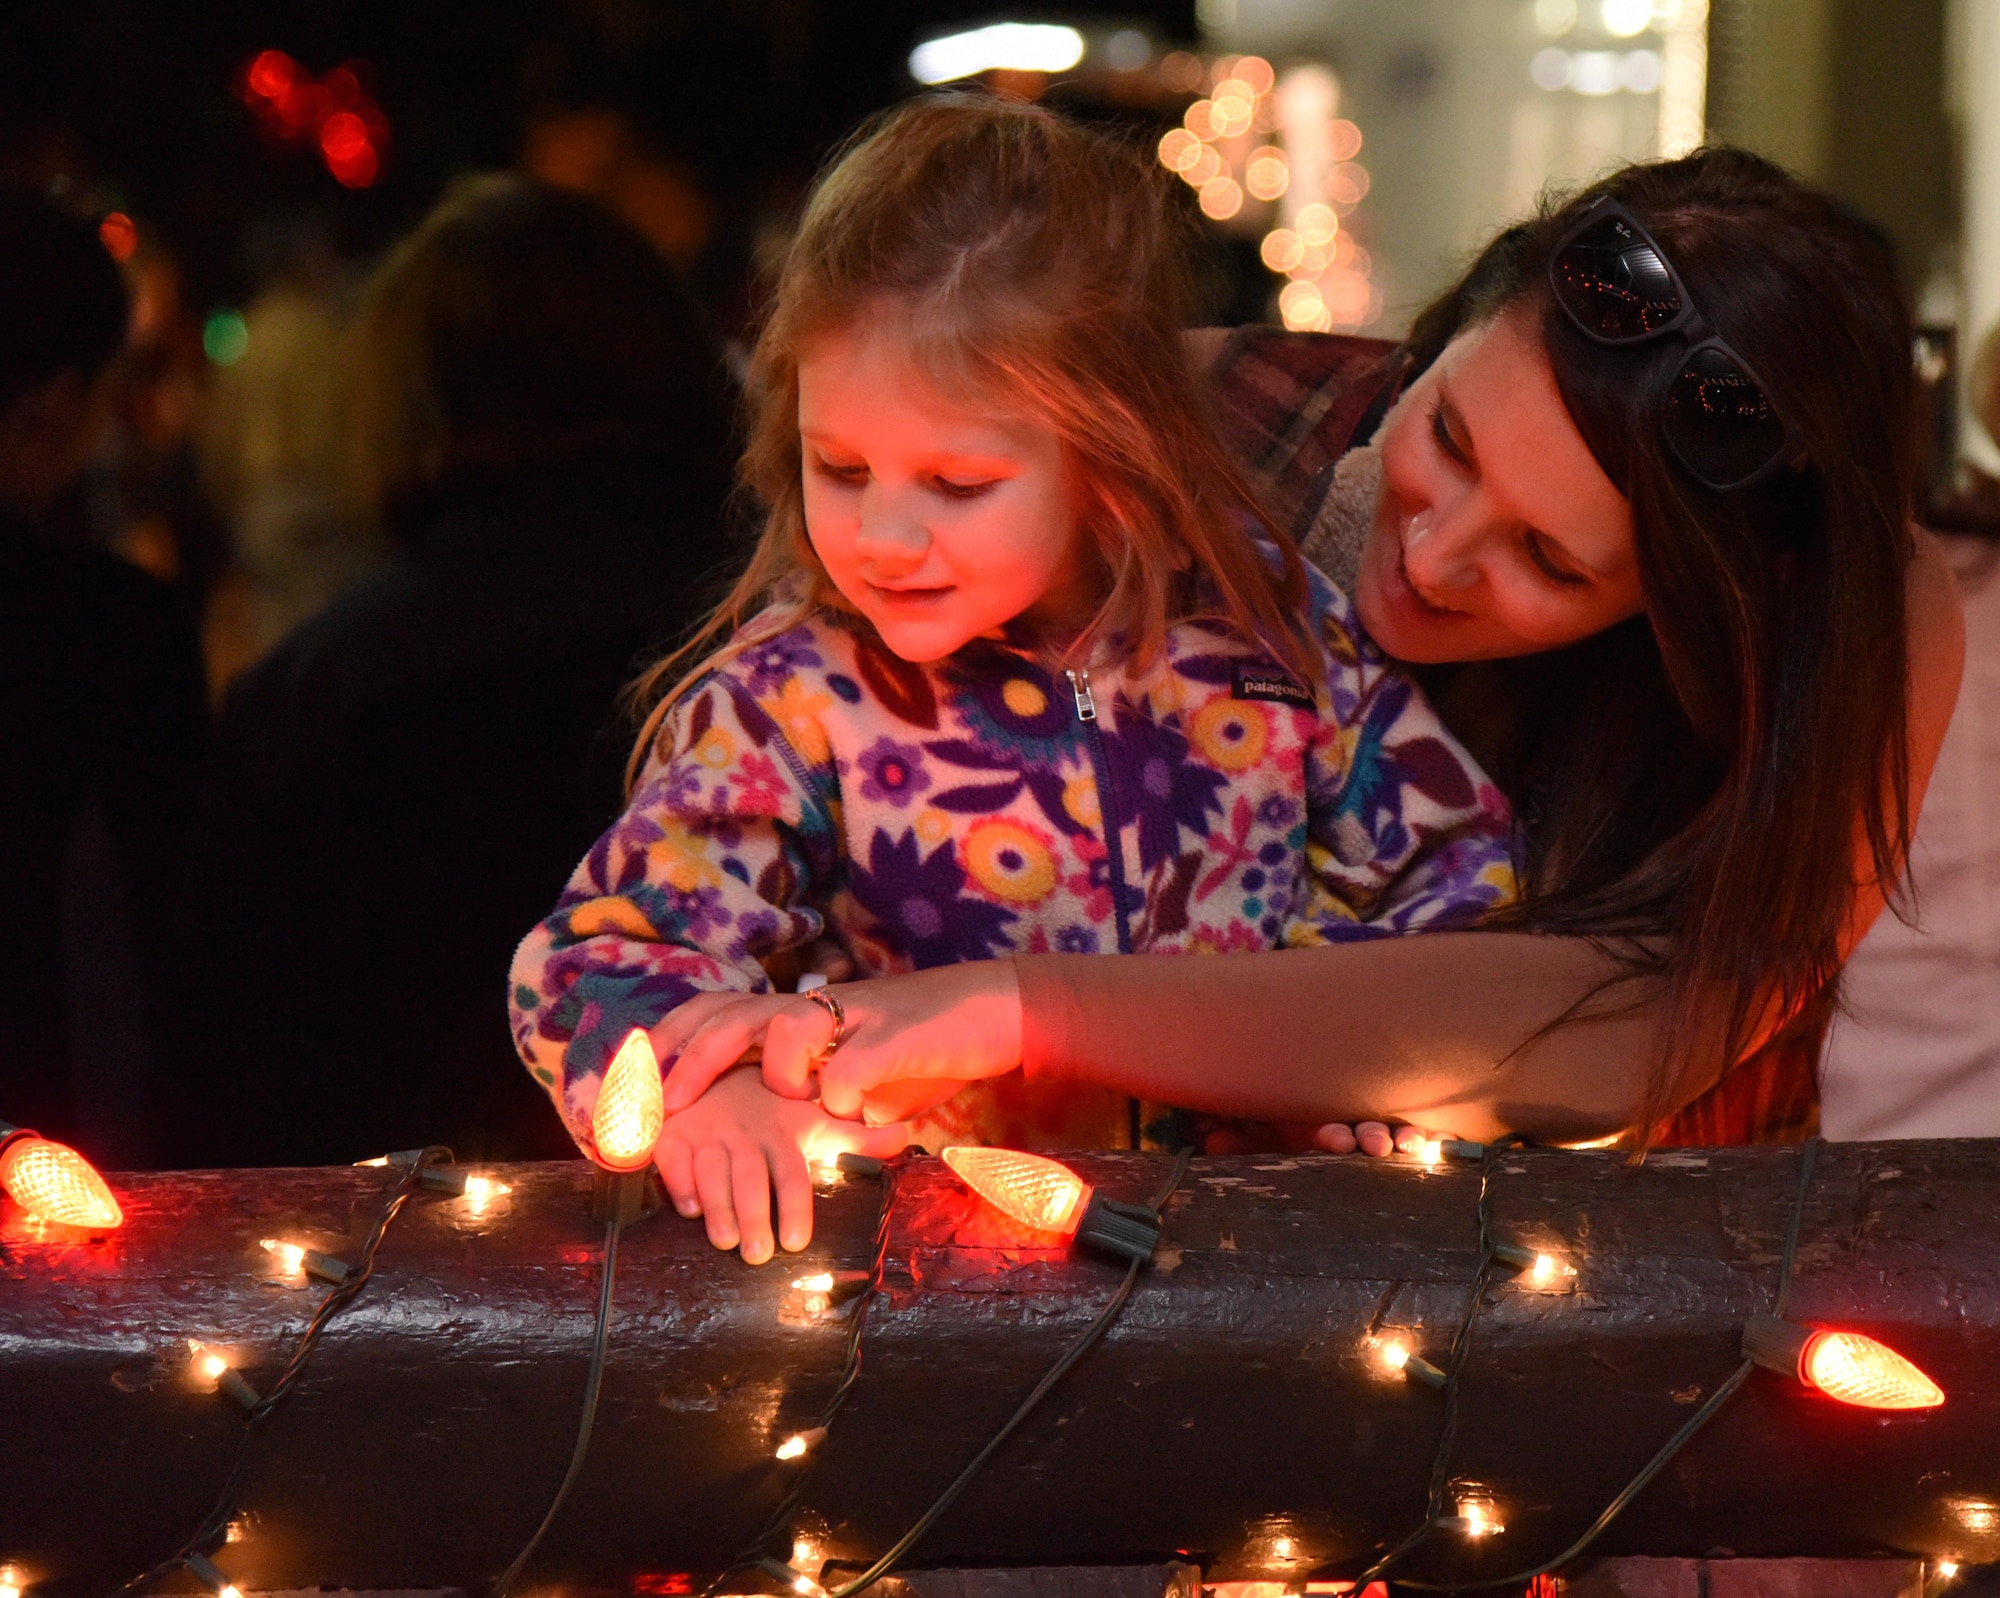 Diana White, 81st Force Support Squadron marketing specialist, and her daughter, Tensley, look at the lights during Keesler’s annual Christmas in the Park celebration at Marina Park Dec. 1, 2016, on Keesler Air Force Base, Miss. The event, hosted by Outdoor Recreation, included a tree lighting ceremony, tour train rides, cookie and ornament decorating, and visits with Santa. (U.S. Air Force photo by Kemberly Groue)